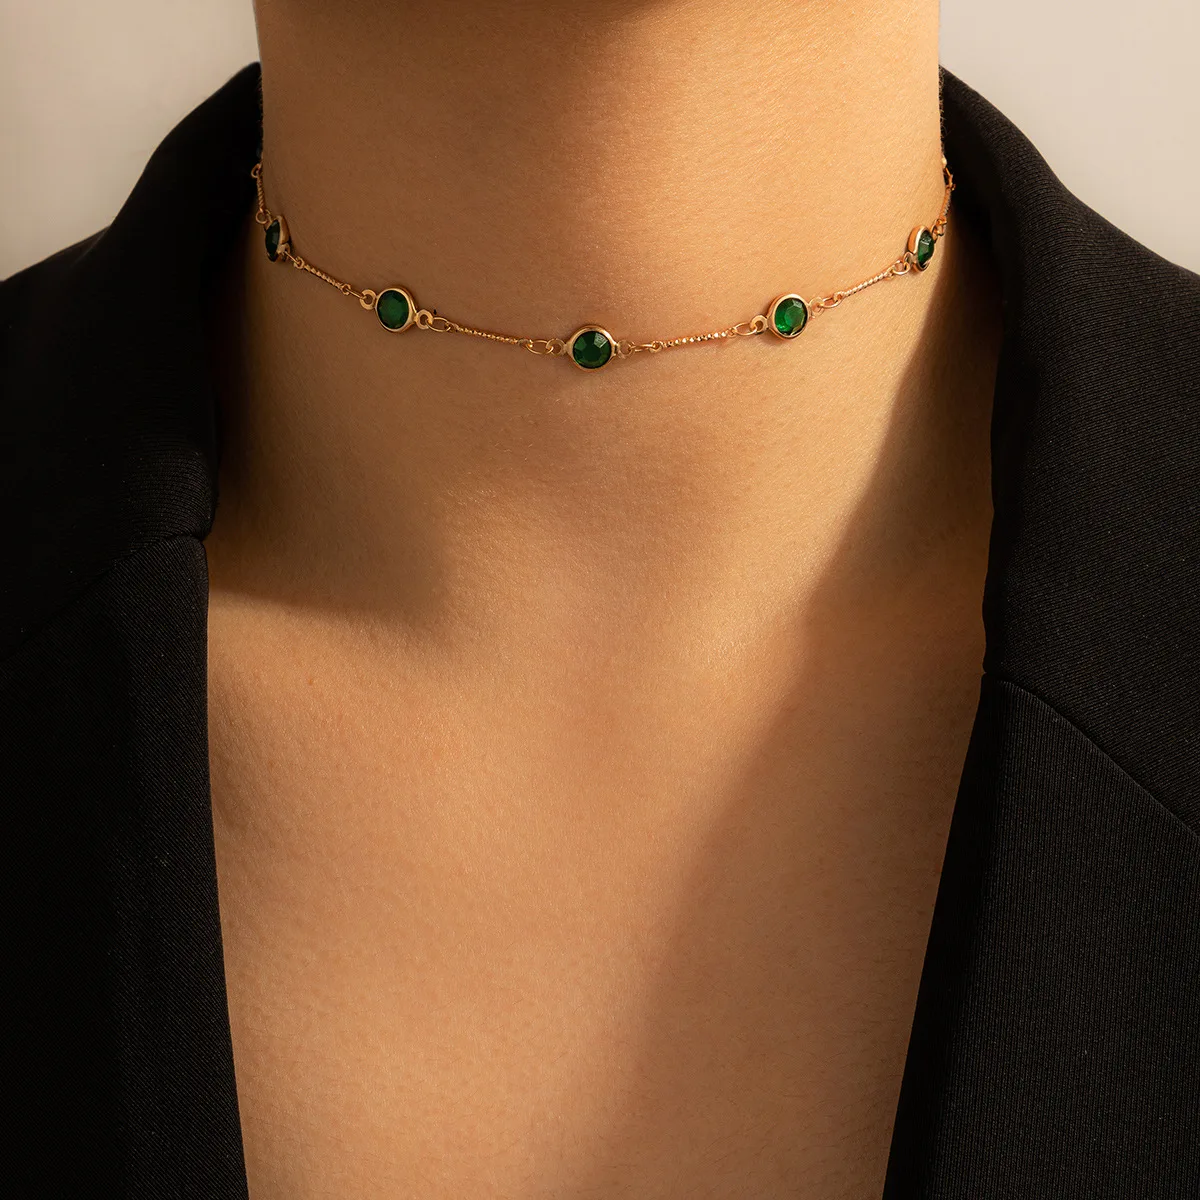 

Tocona Tredny Green Rhinestone Chain Choker Necklace for Women Gold Color Alloy Metal Handmade Jewelry Accessories Collar 15633